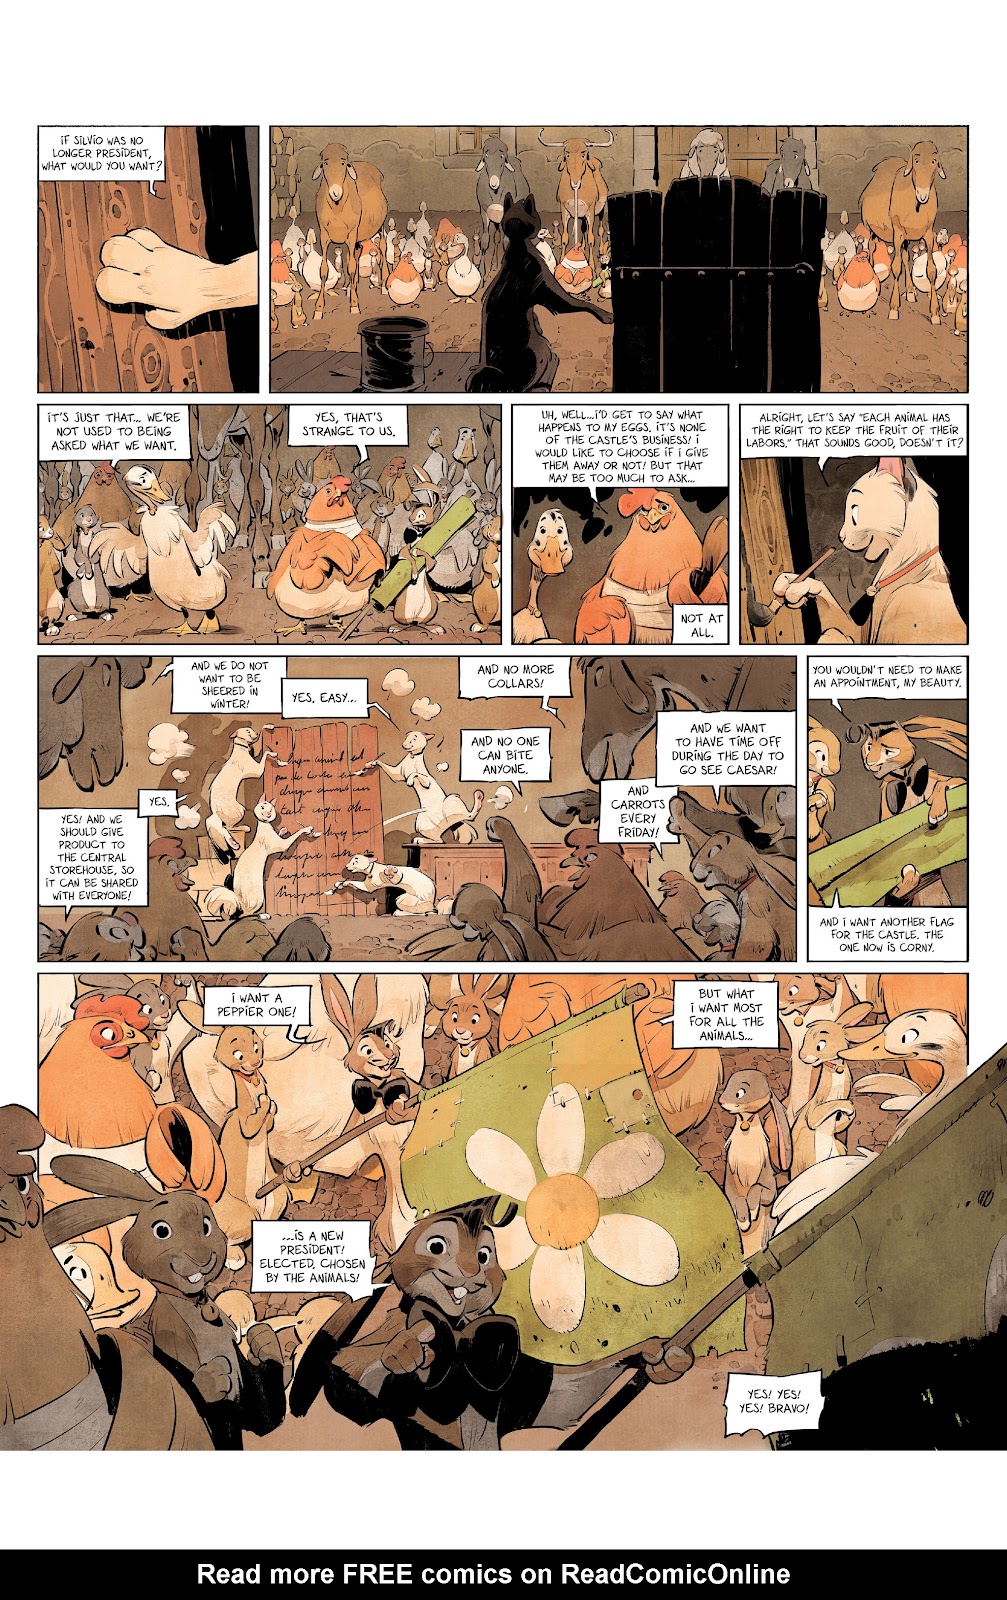 Animal Castle Vol. 2 issue 1 - Page 16